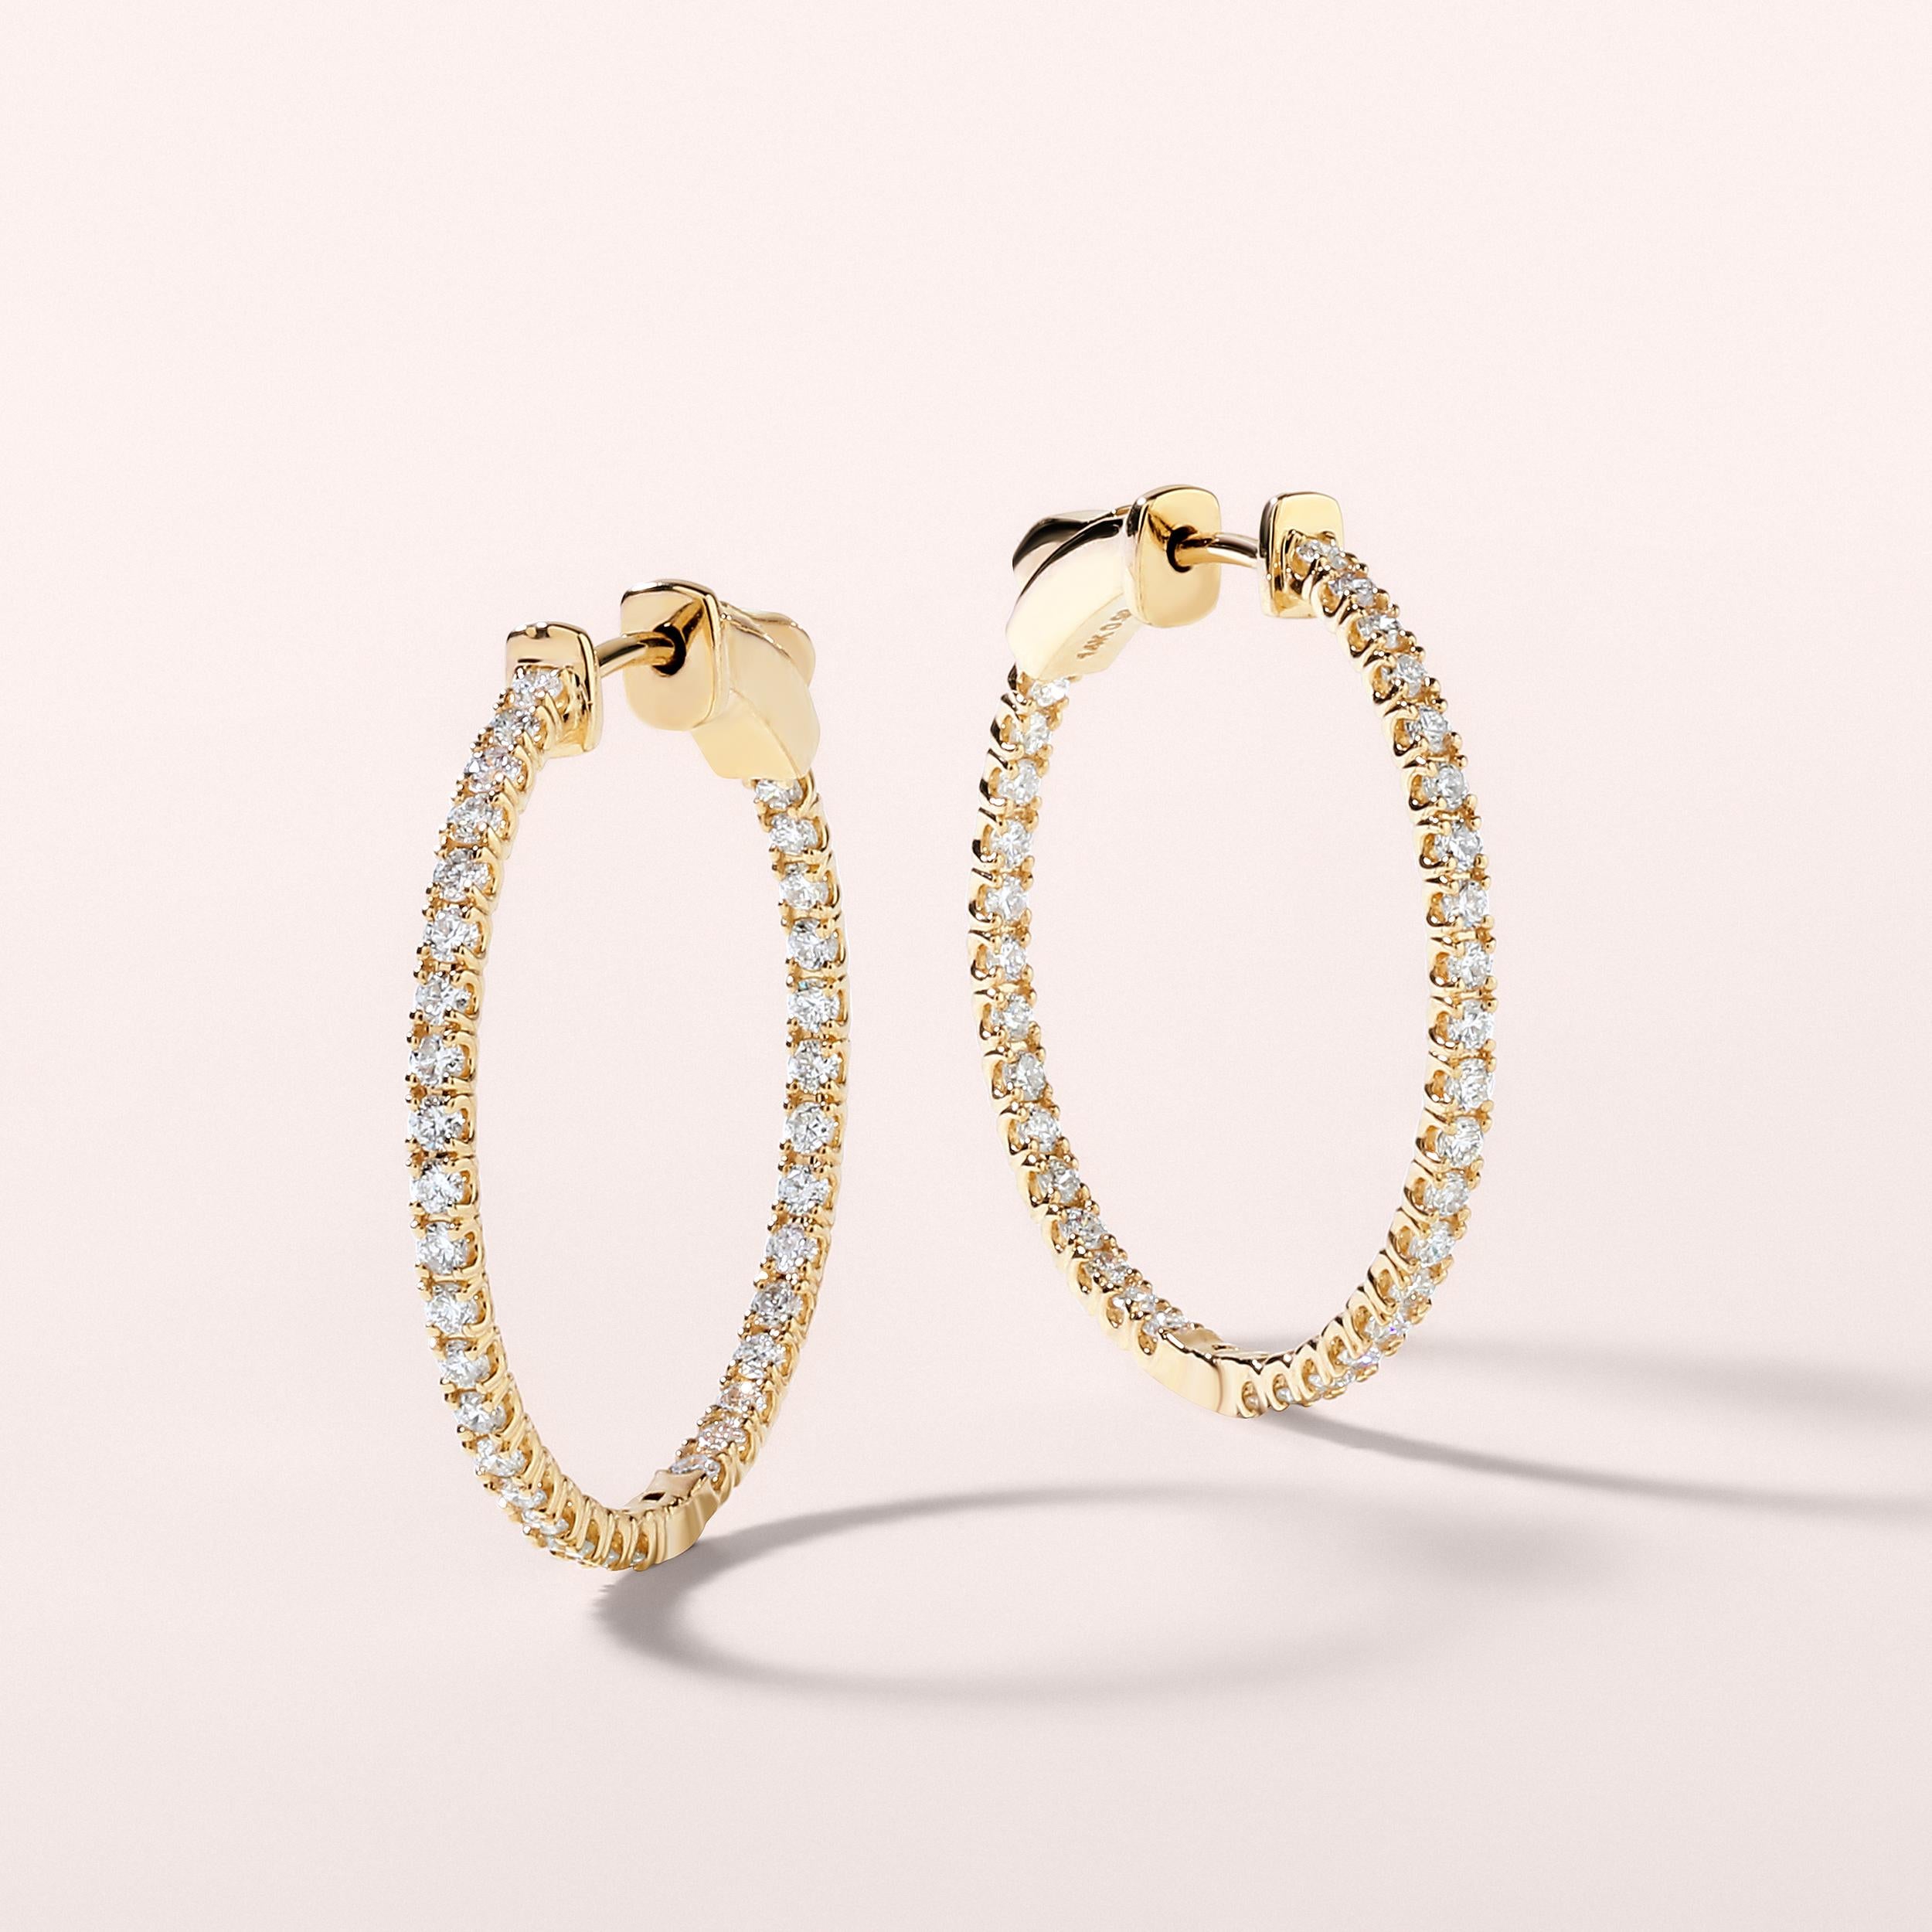 Crafted in 3.9 grams of 14K Yellow Gold, the earrings contains 68 stones of Round Diamonds with a total of 0.98 carat in G-H color and SI clarity.

CONTEMPORARY AND TIMELESS ESSENCE: Crafted in 14-karat/18-karat with 100% natural diamond and